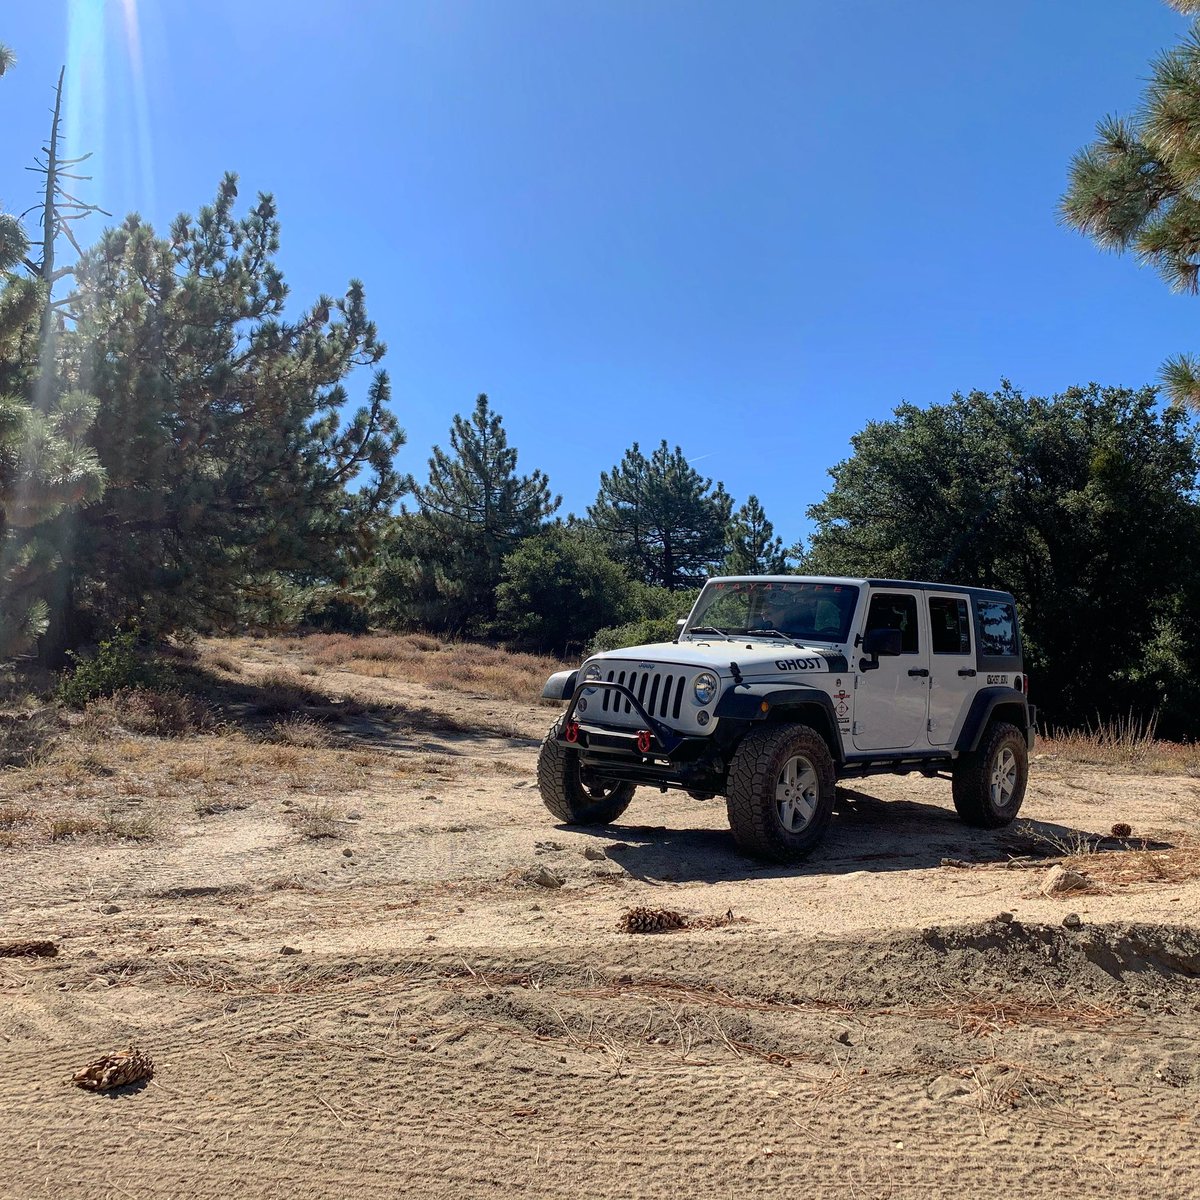 How about a Where To Wednesday 😁!

Driving the Jeep is like a drug... I need MORE 🤣 Happy Humpday everyone

__O|||||||O__
#HappyHumpday #GetOutside #DoSomethingDifferent #TheOutdoors #OnwardsToAdventure #Jeep #Jeepers #JeepWave